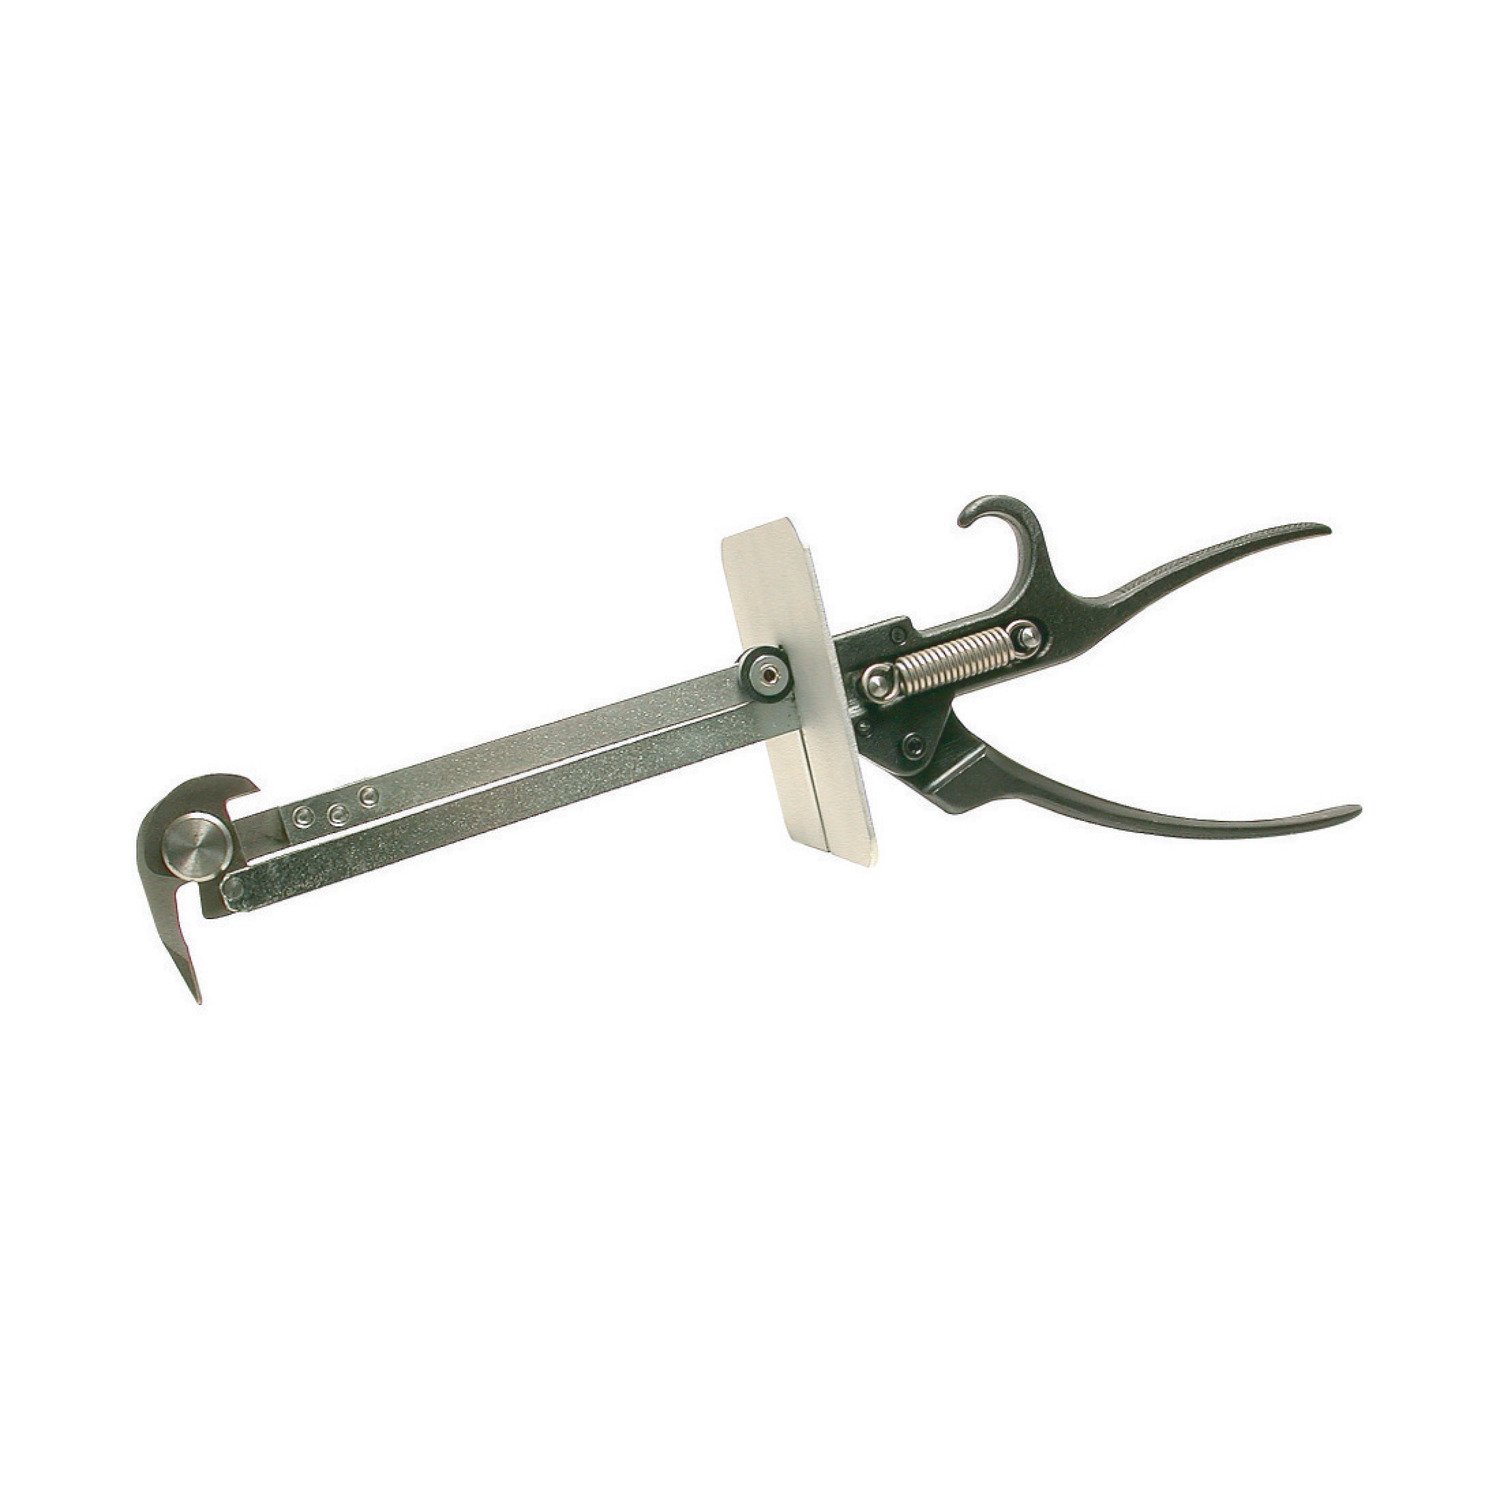 97061 Chip Cutter and Hook